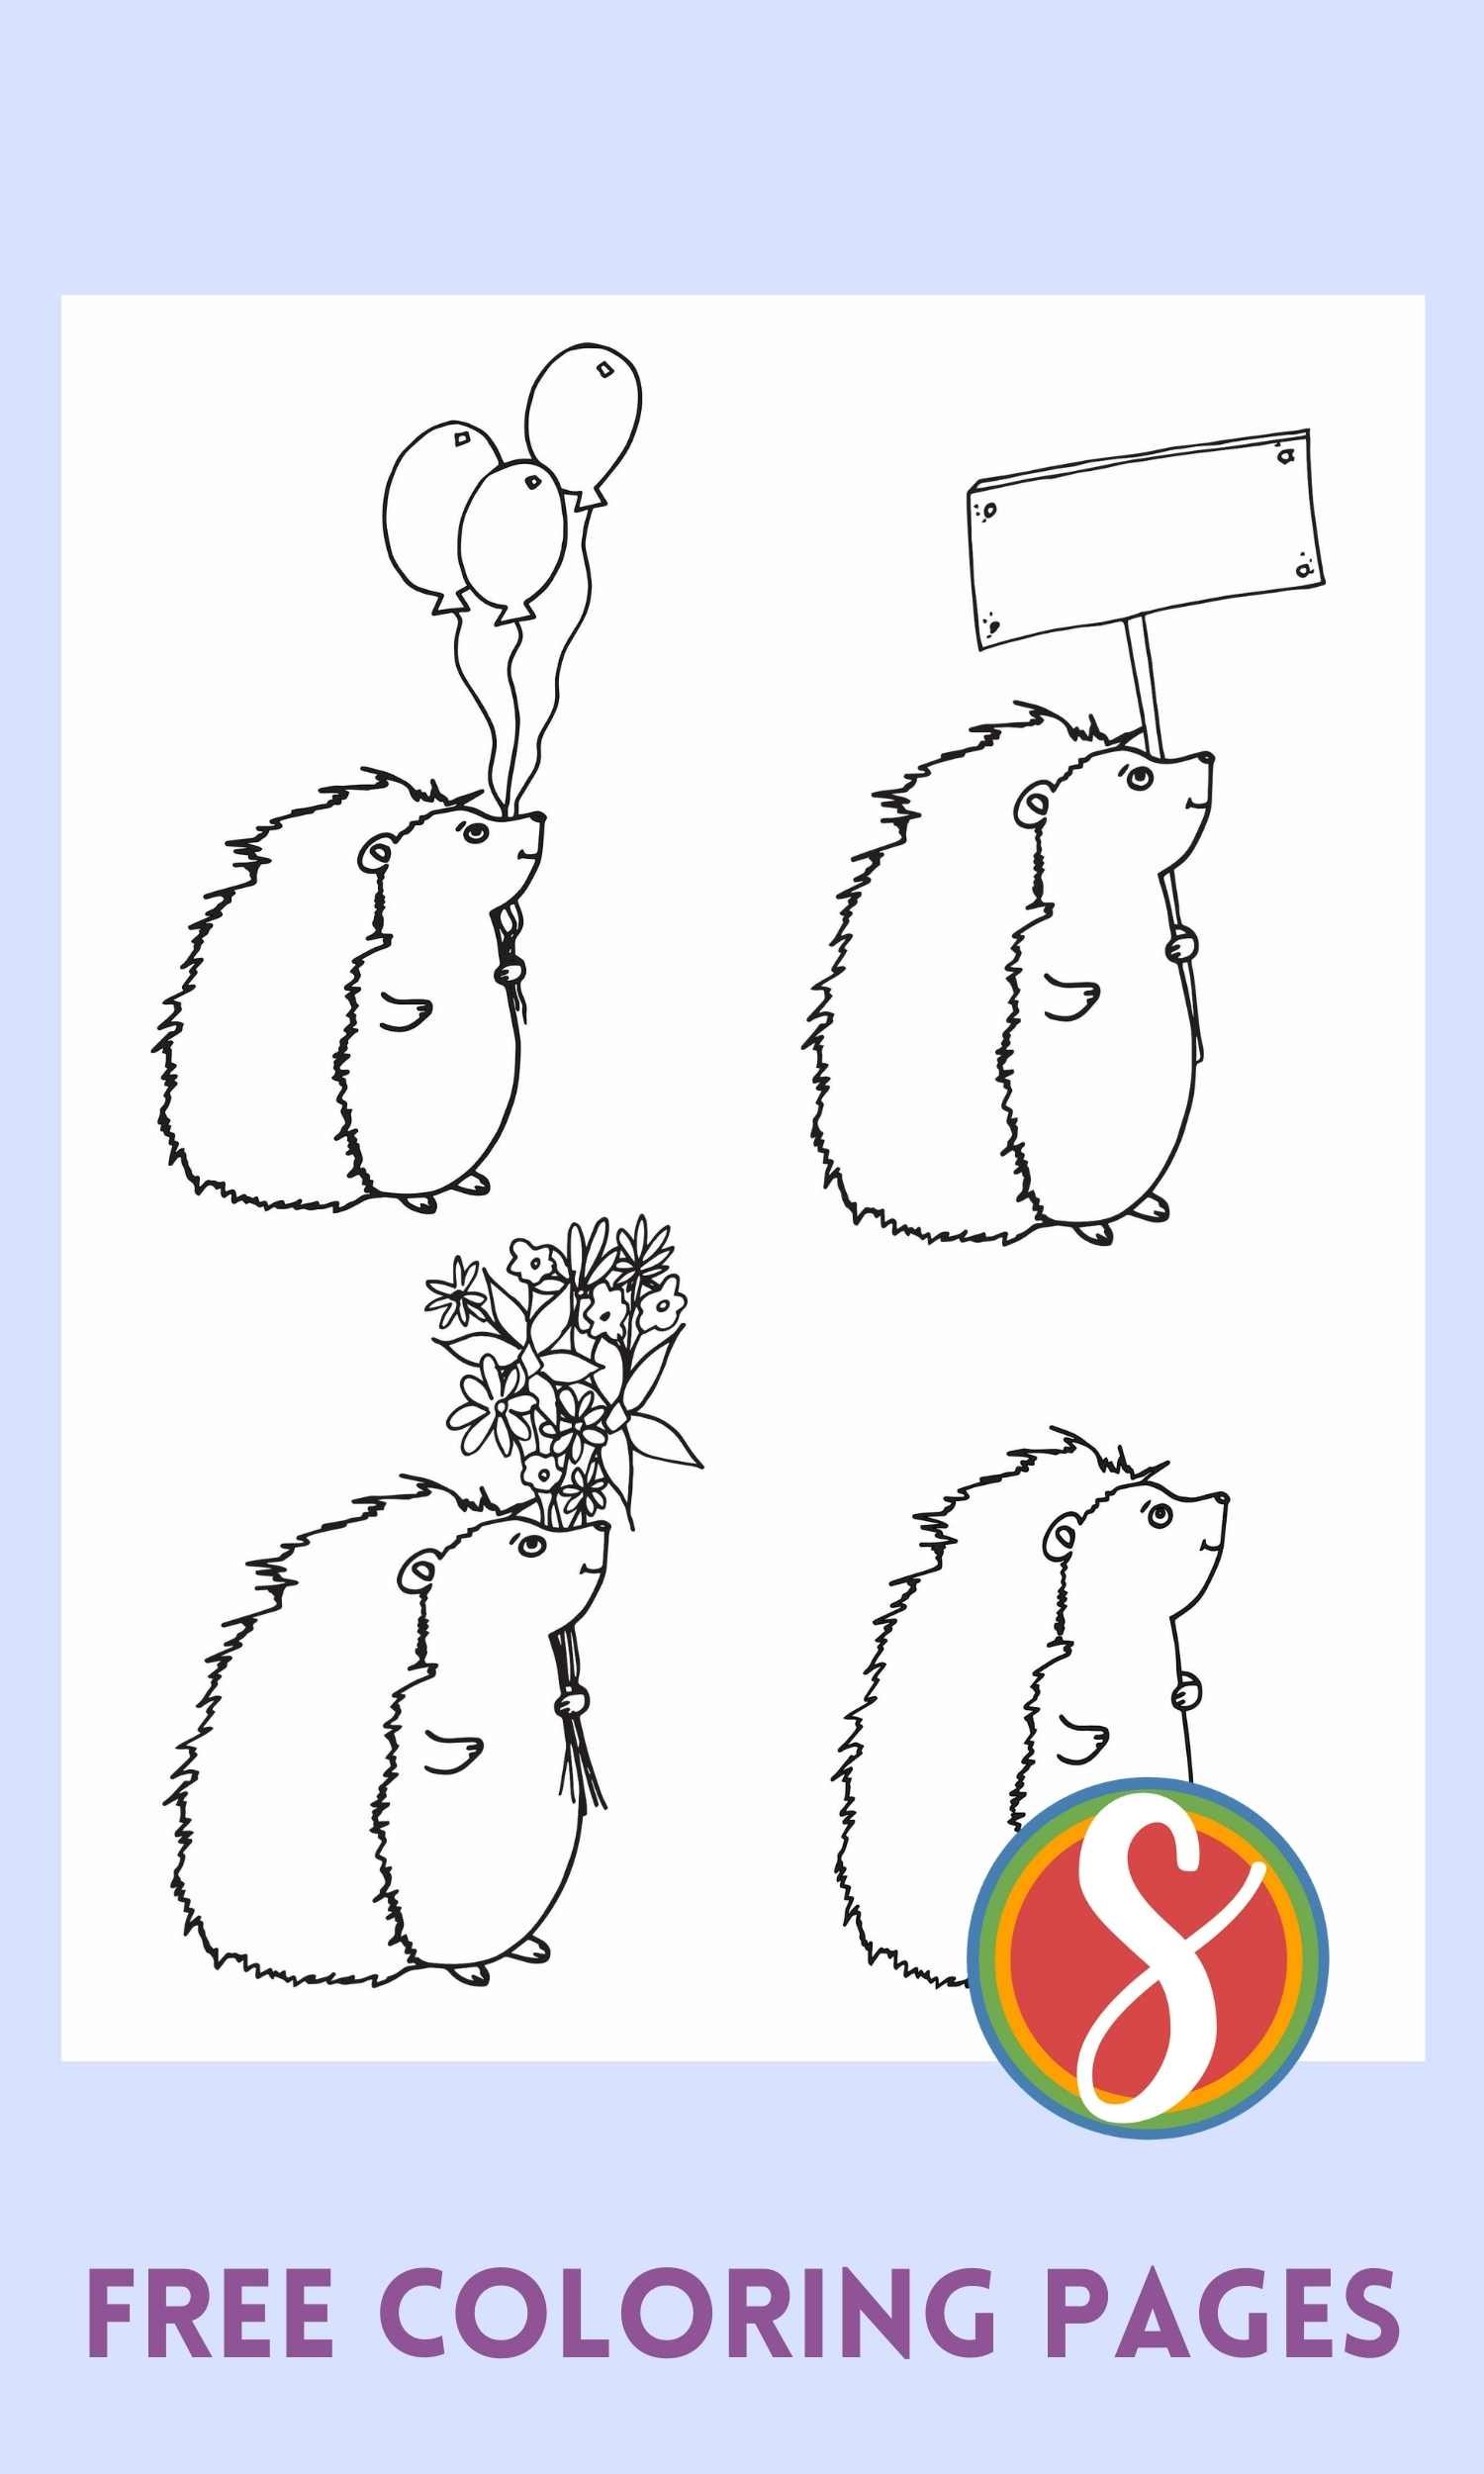 a hedgehog coloring page with 4, one holding balloons, one holding a sign, one holding flowers, and one plain